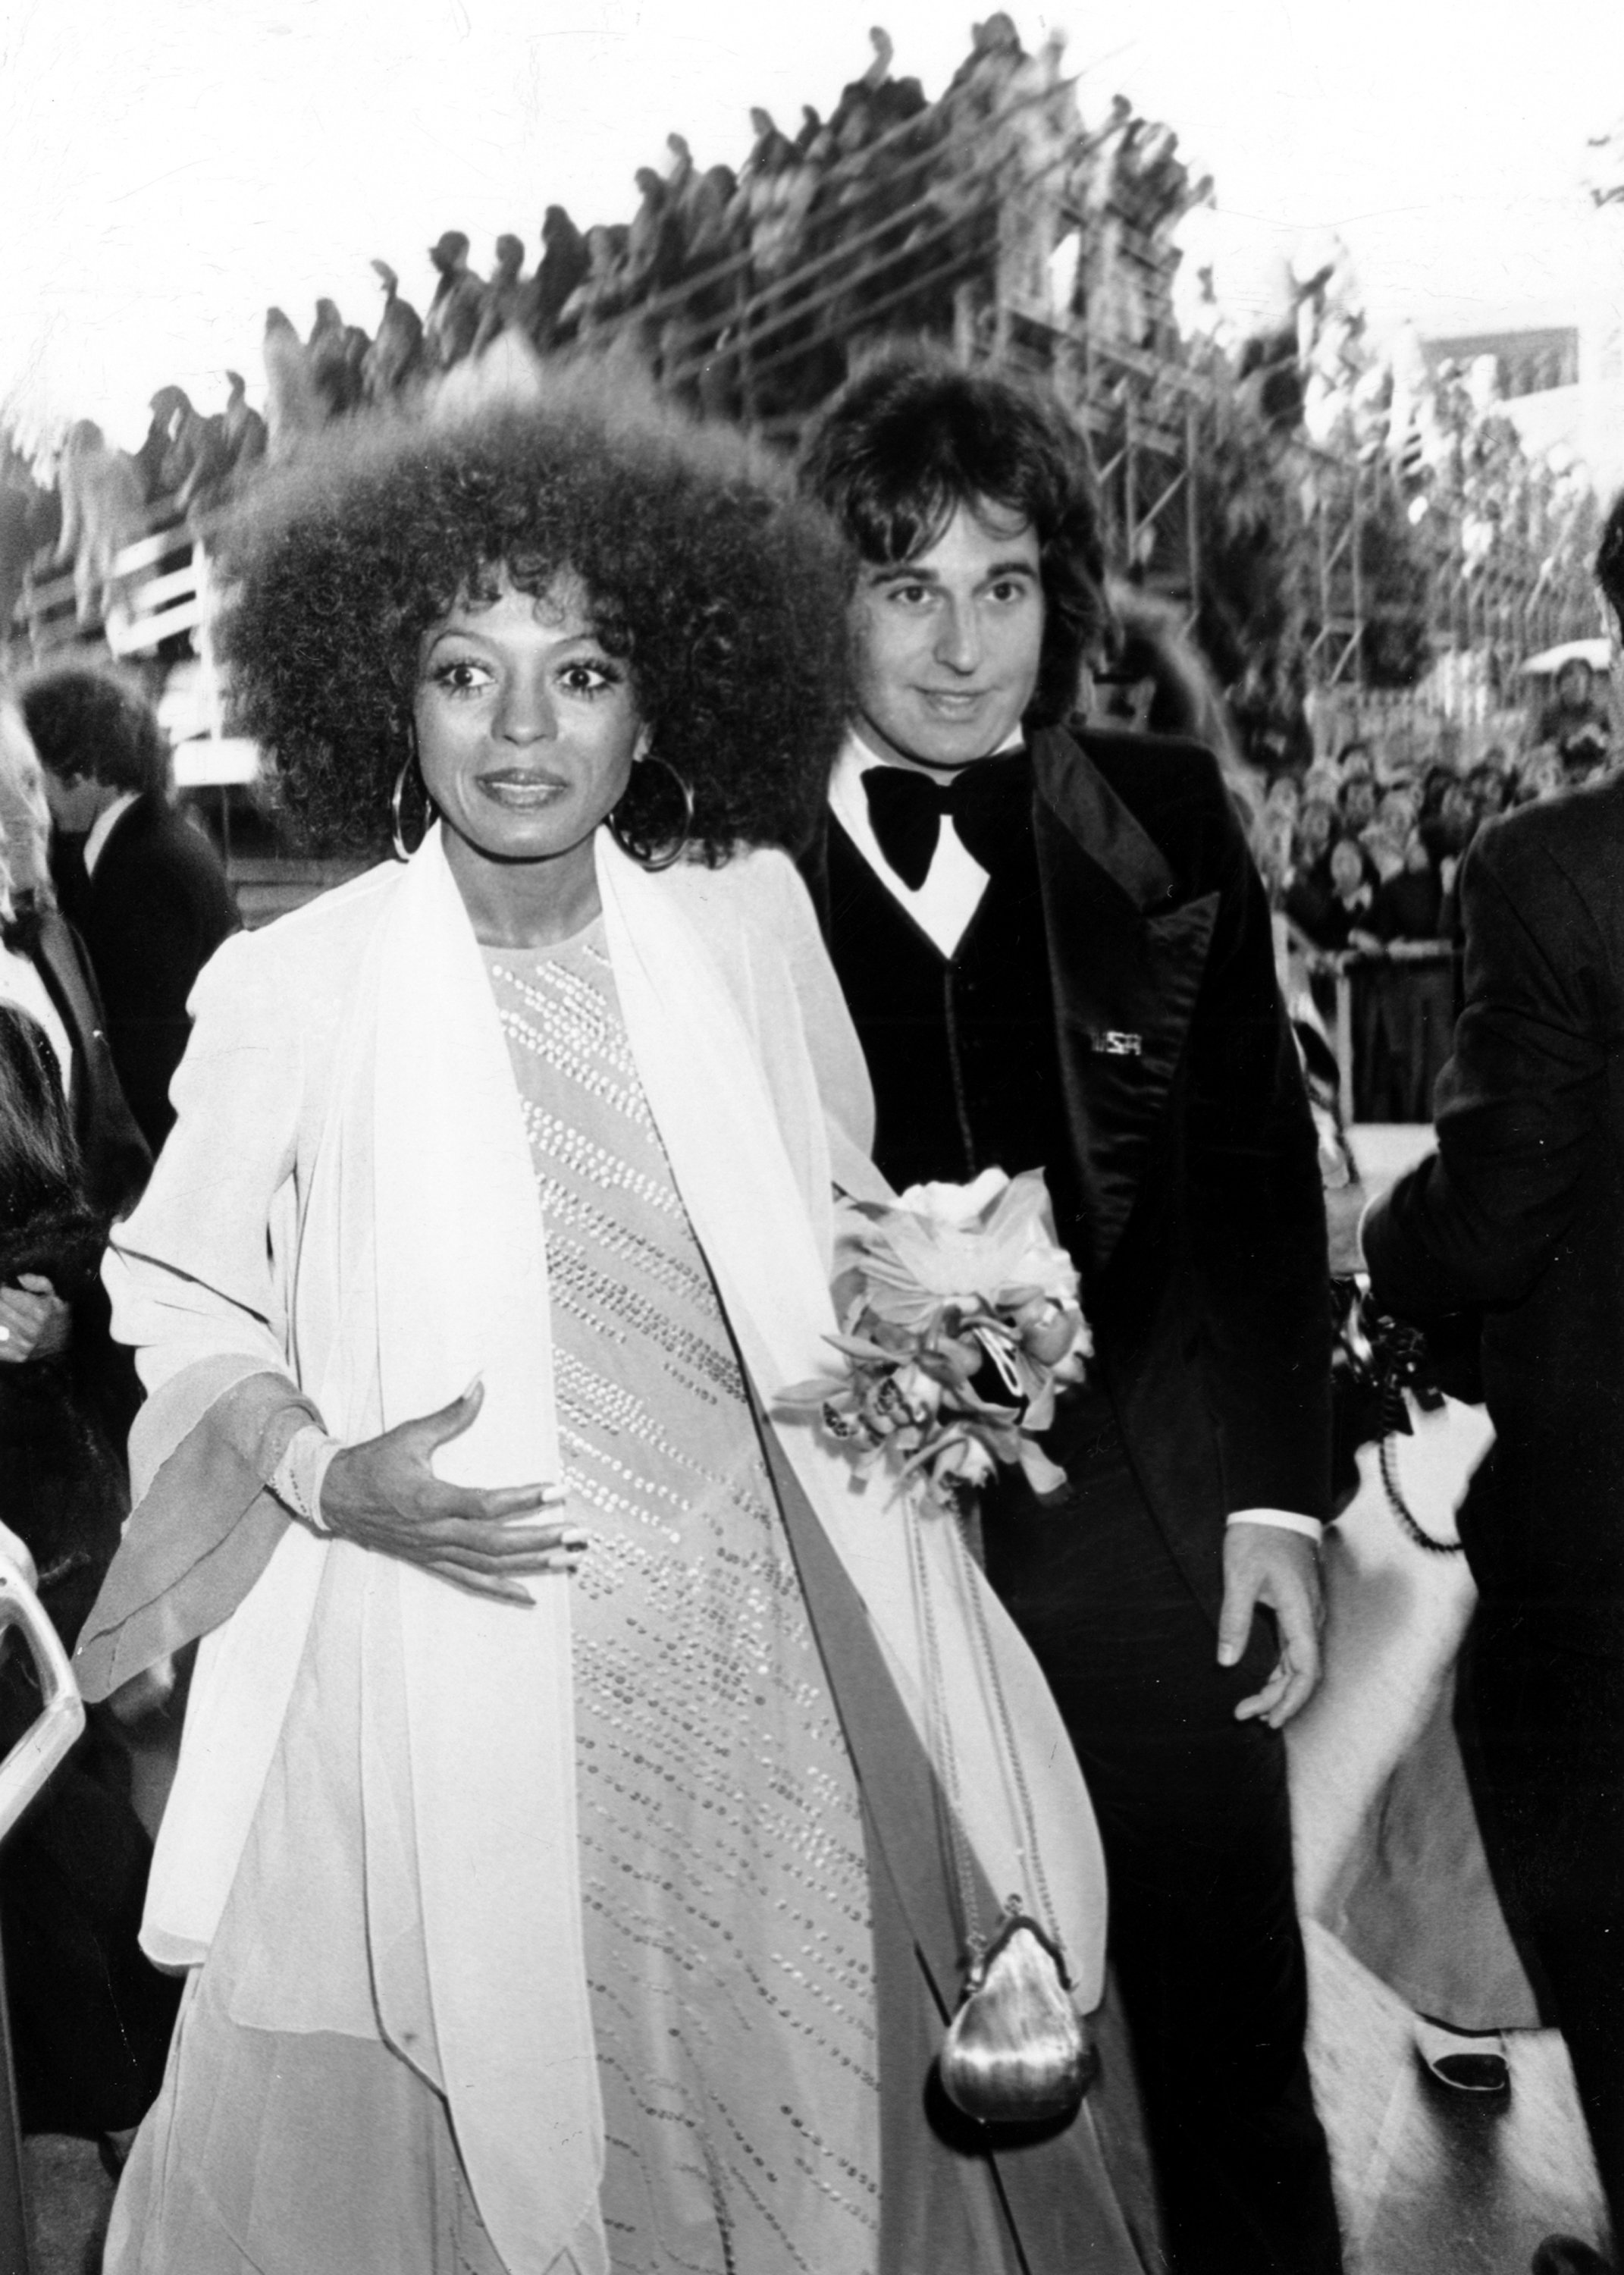 Diana Ross and her husband Robert Ellis Silberstein attend the 46th Academy awards at the Dorothy Chandler Pavilion on April 2, 1974 in Los Angeles, California | Photo: Getty Images